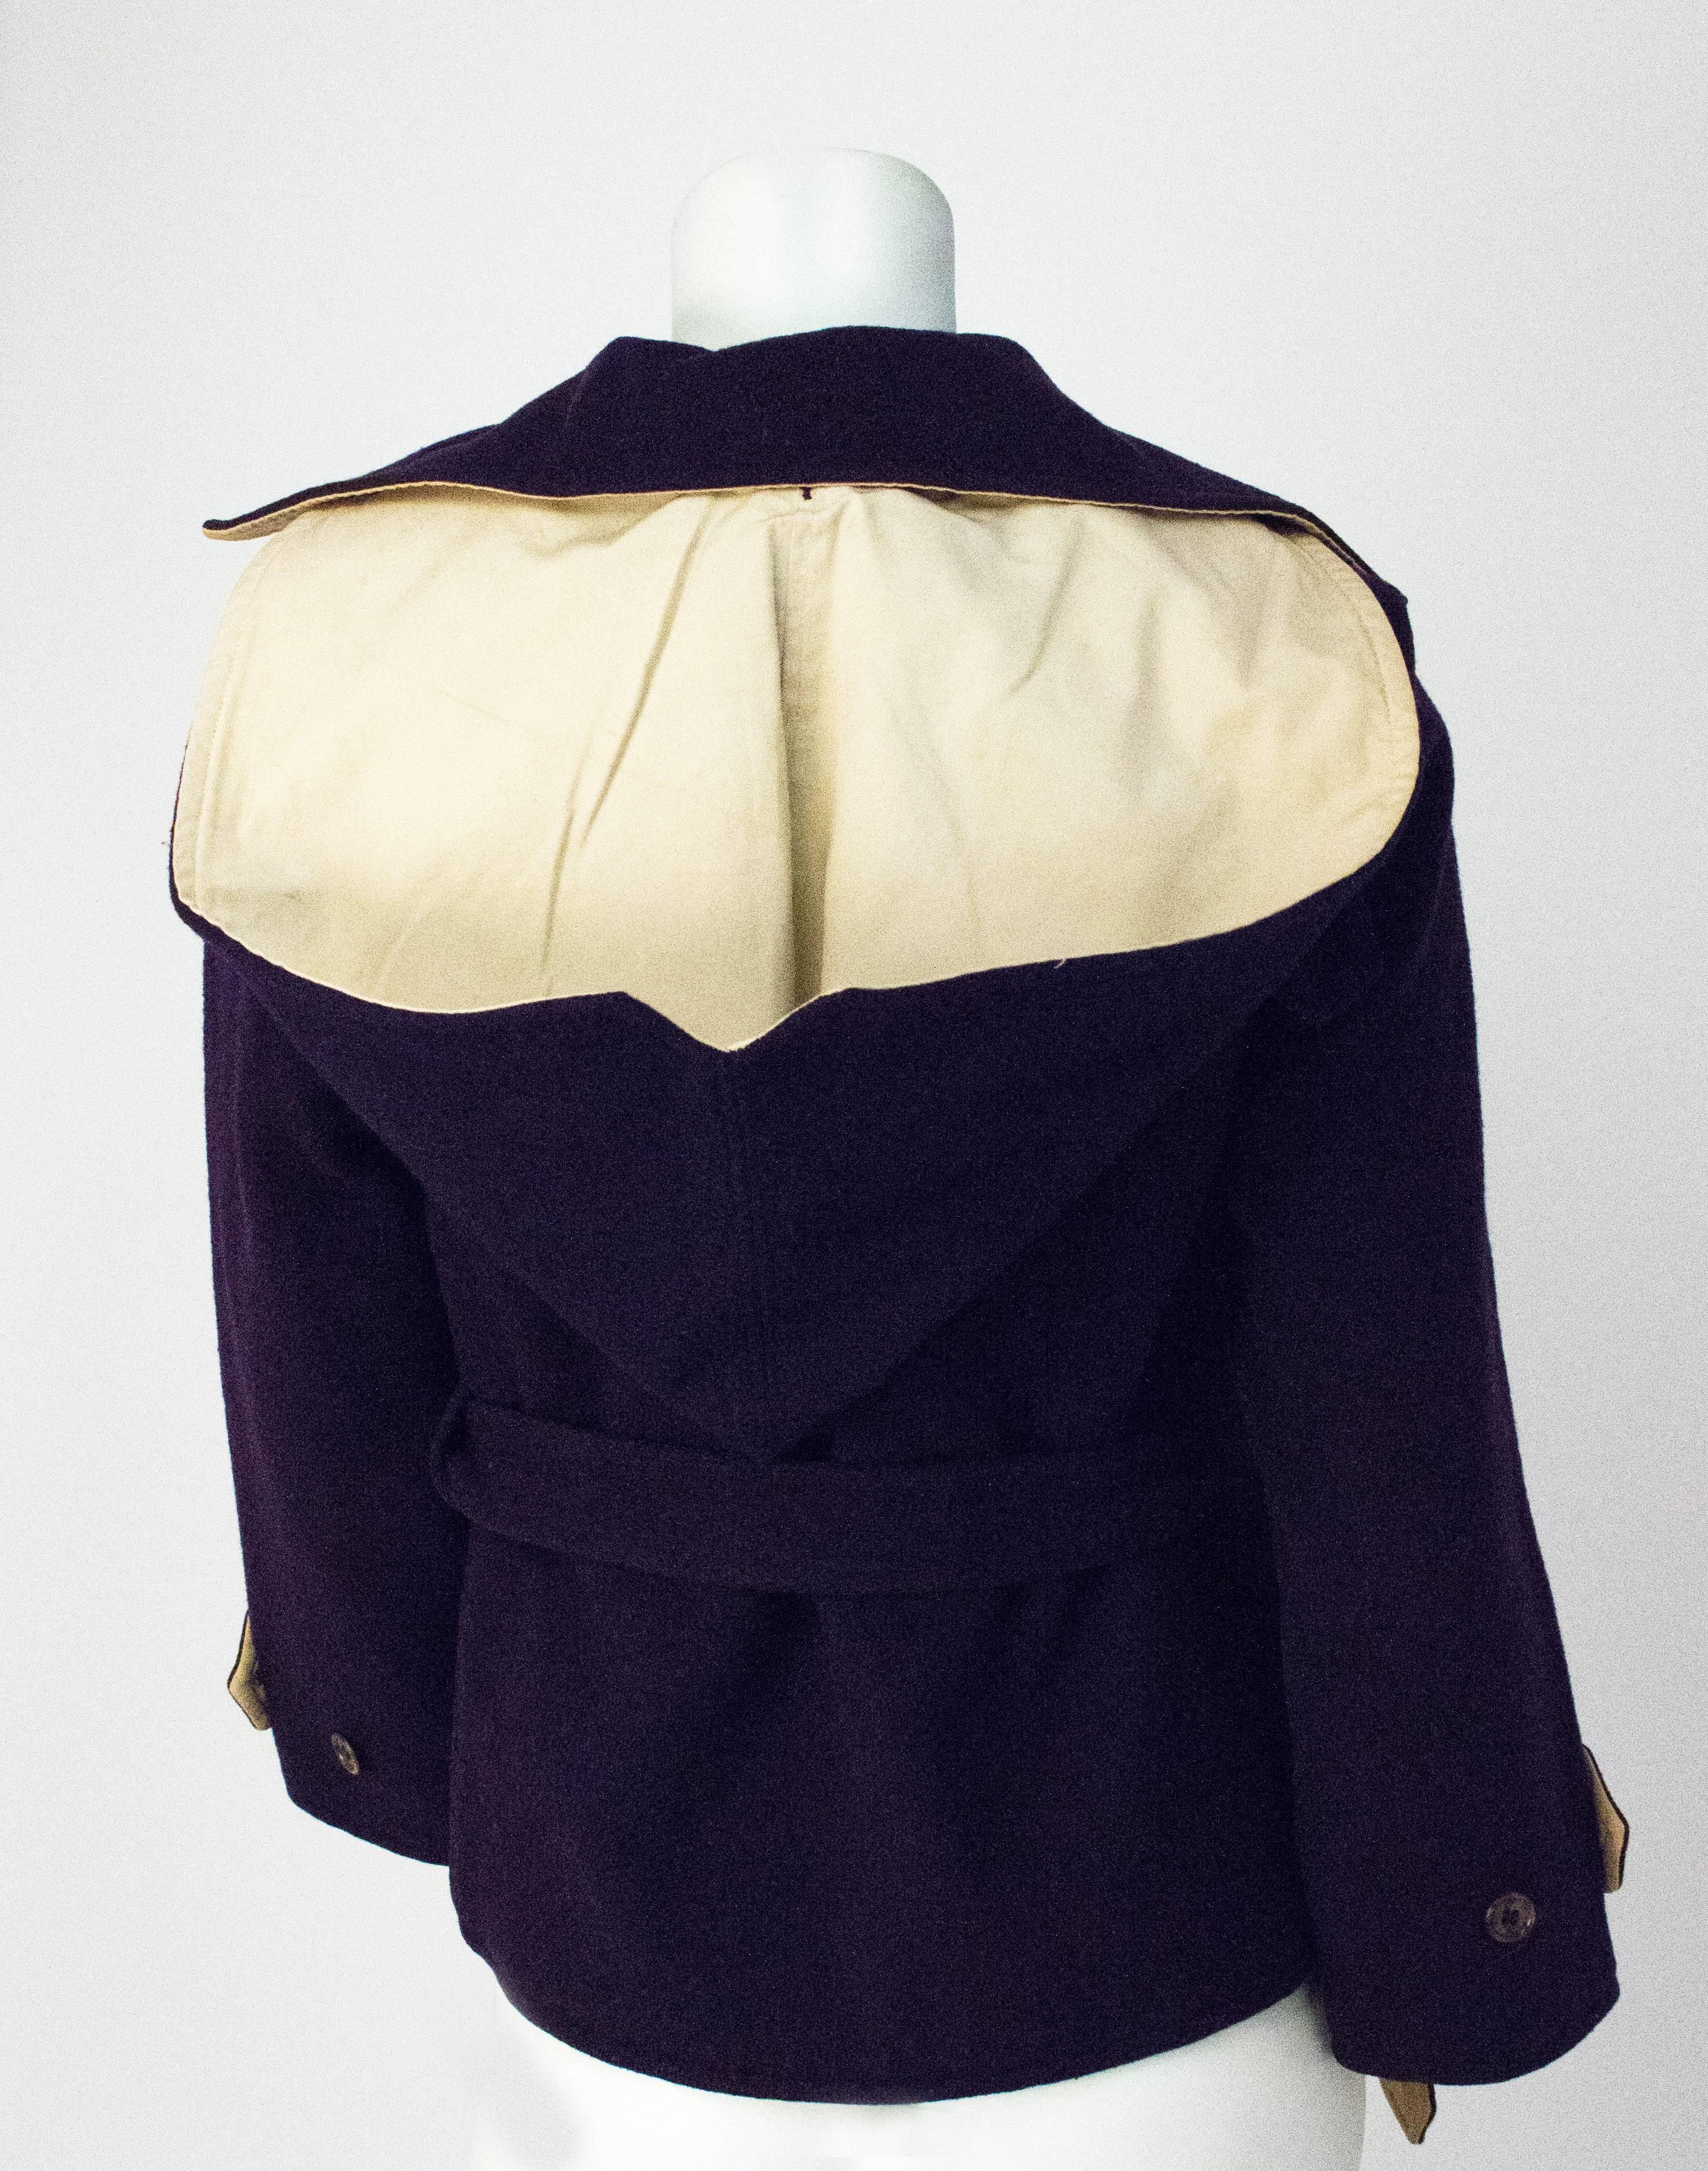 60s Navy Wool Jacket with Pointed Hood. Cotton Lining discolored from age.